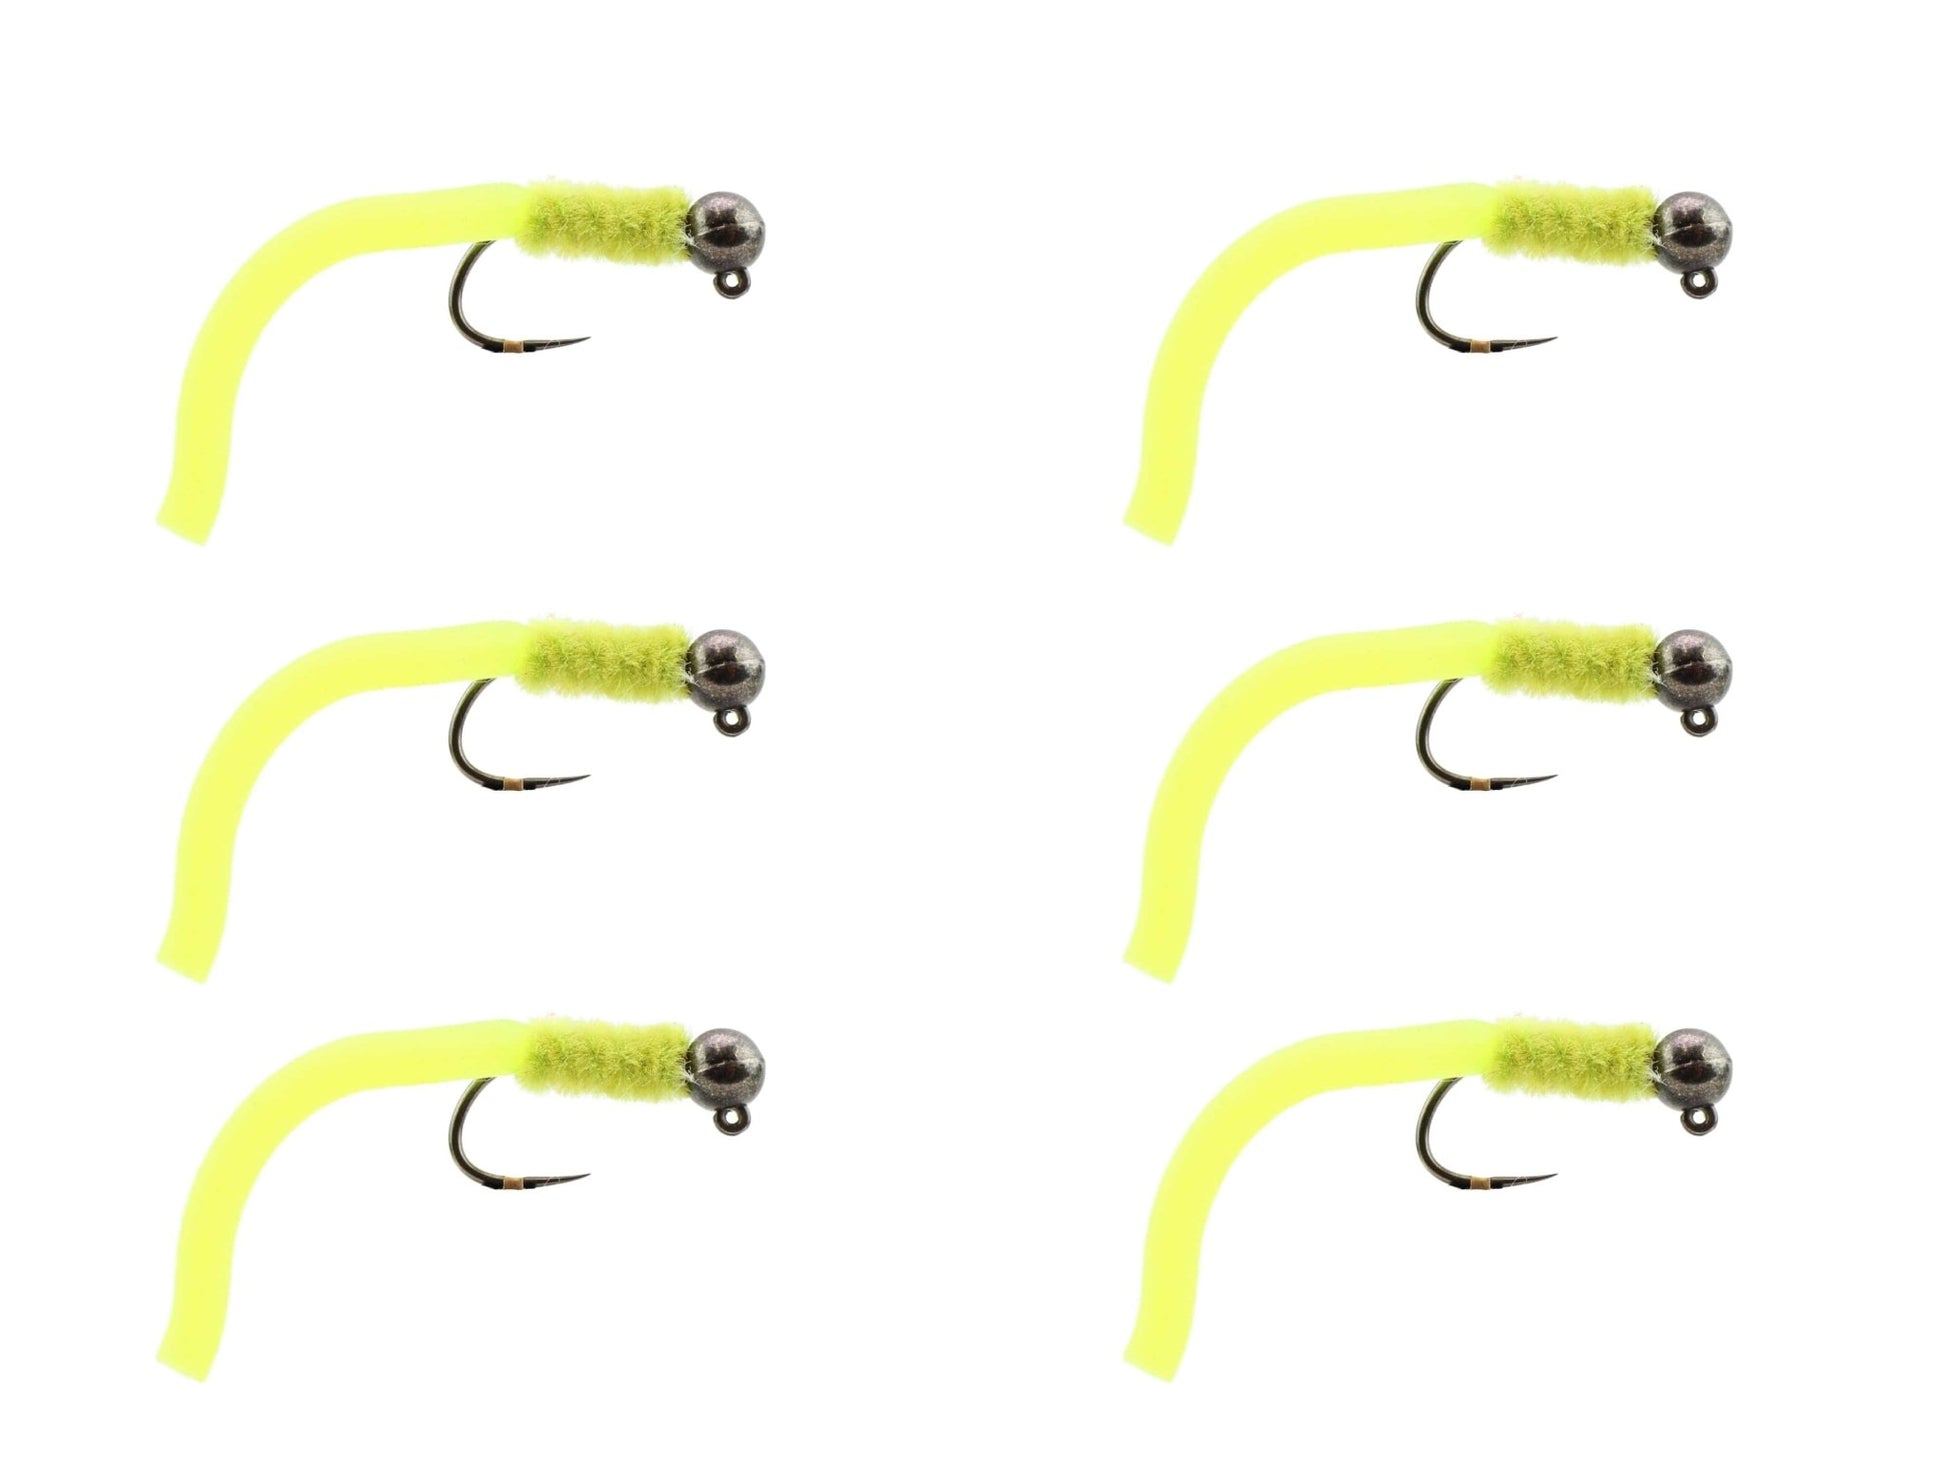 Wild Water Fly Fishing Tungsten Bead Head Yellow Squirmy Worm, Size 12, Qty. 6 - Angler's Pro Tackle & Outdoors